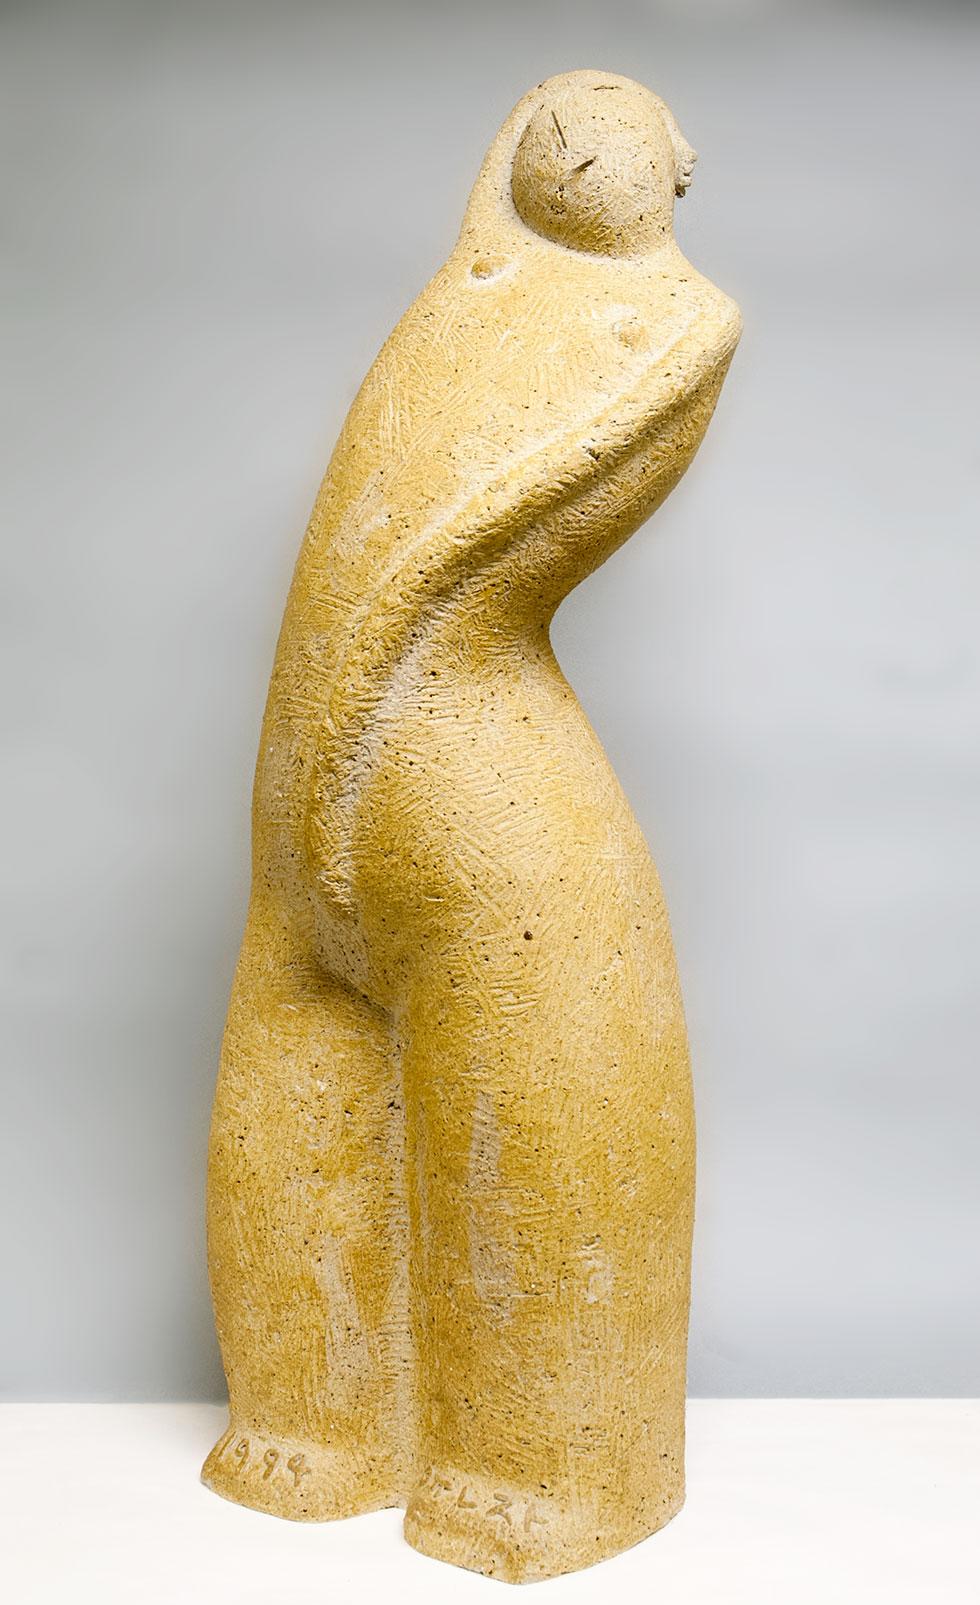 Untitled, 1994, Yoon-Ja Park. stoneware, 37.5 in. x 12.5 in. x 10 in. (95.3cm x 31.8cm x 25.4cm), 94.016.1. Gift of the artist.